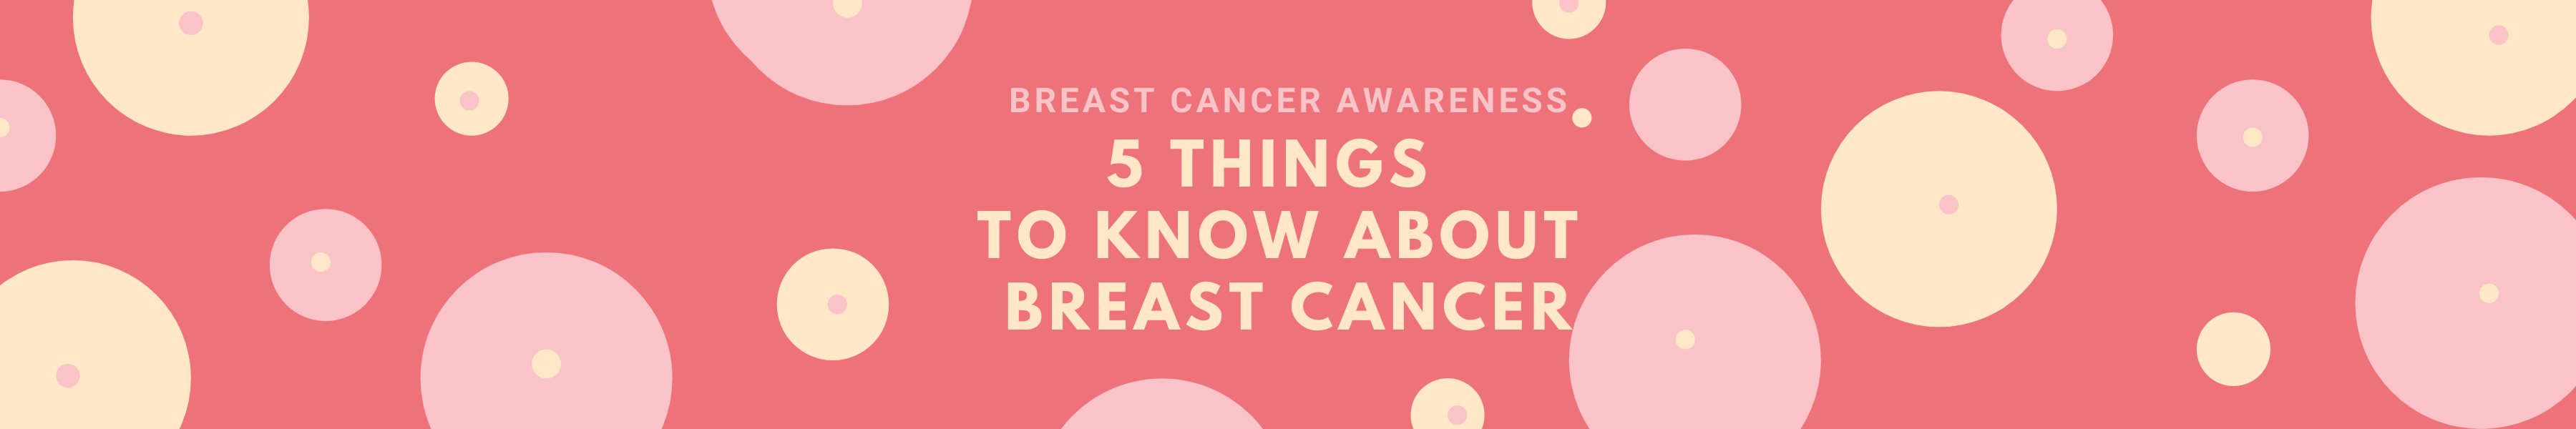 5 Things to Know About Breast Cancer